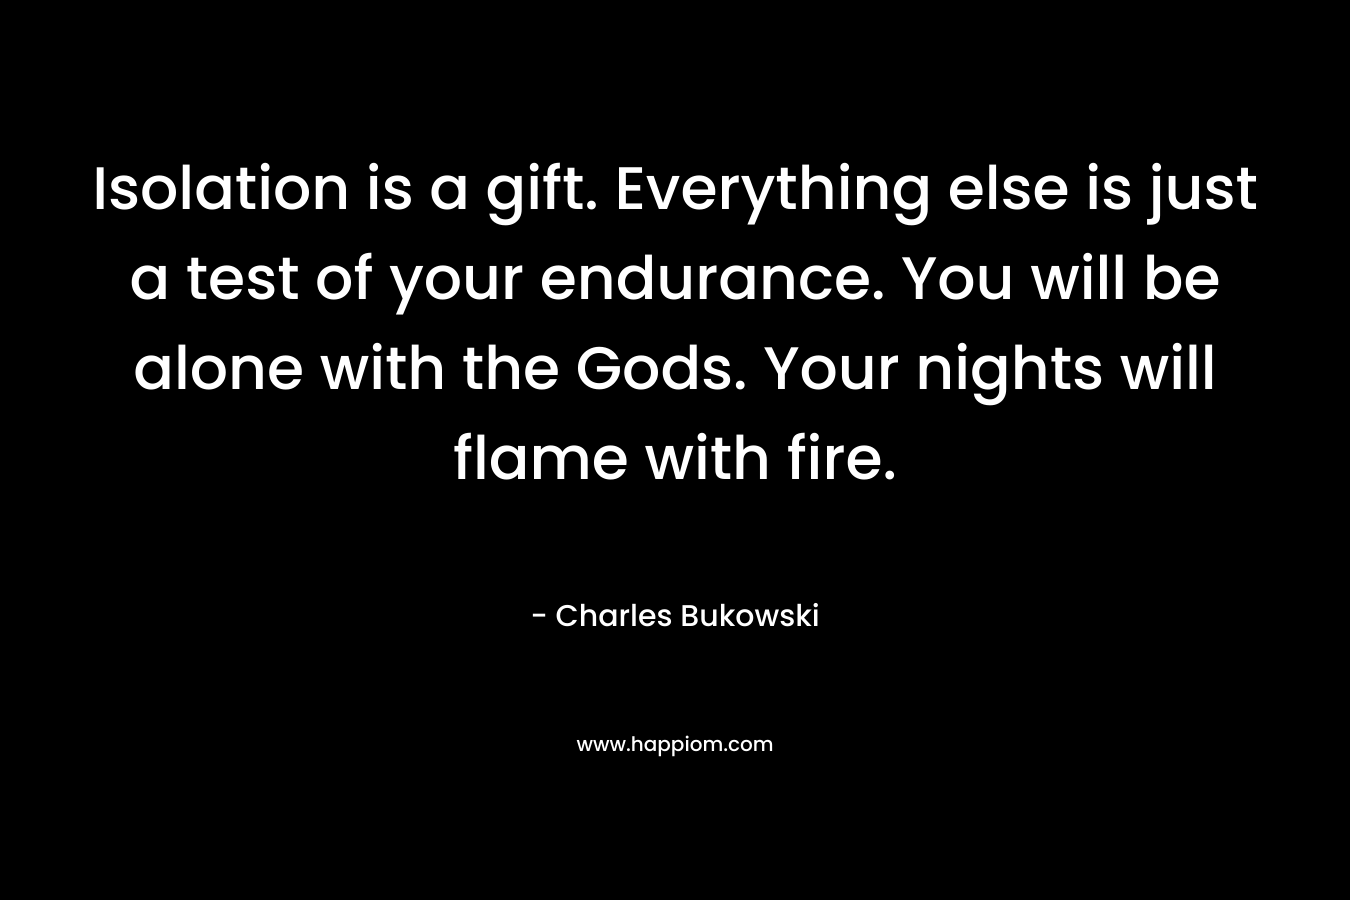 Isolation is a gift. Everything else is just a test of your endurance. You will be alone with the Gods. Your nights will flame with fire. – Charles Bukowski